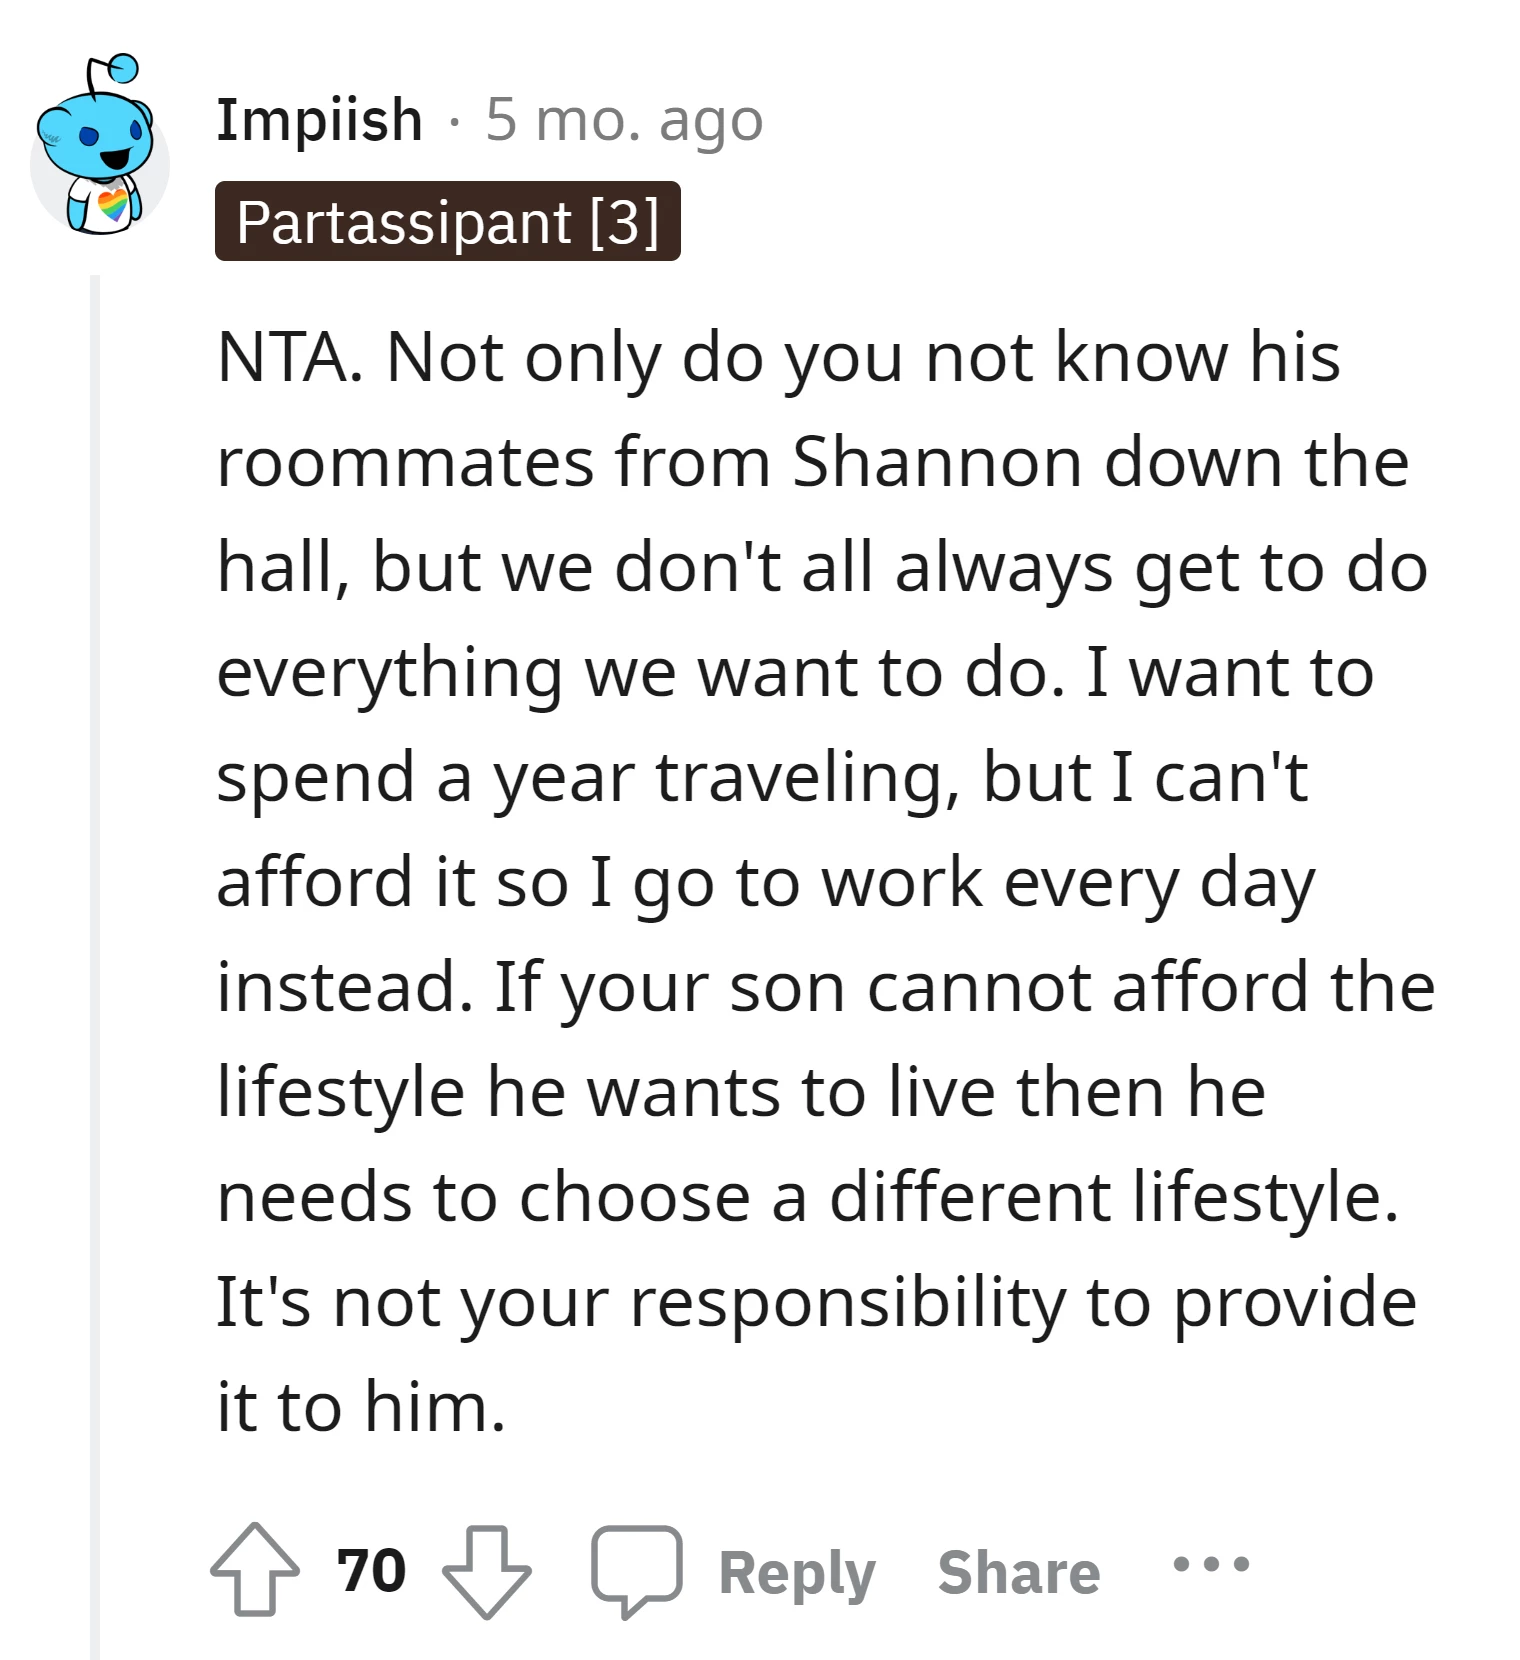 If the son can't afford his desired lifestyle, he should consider a different one